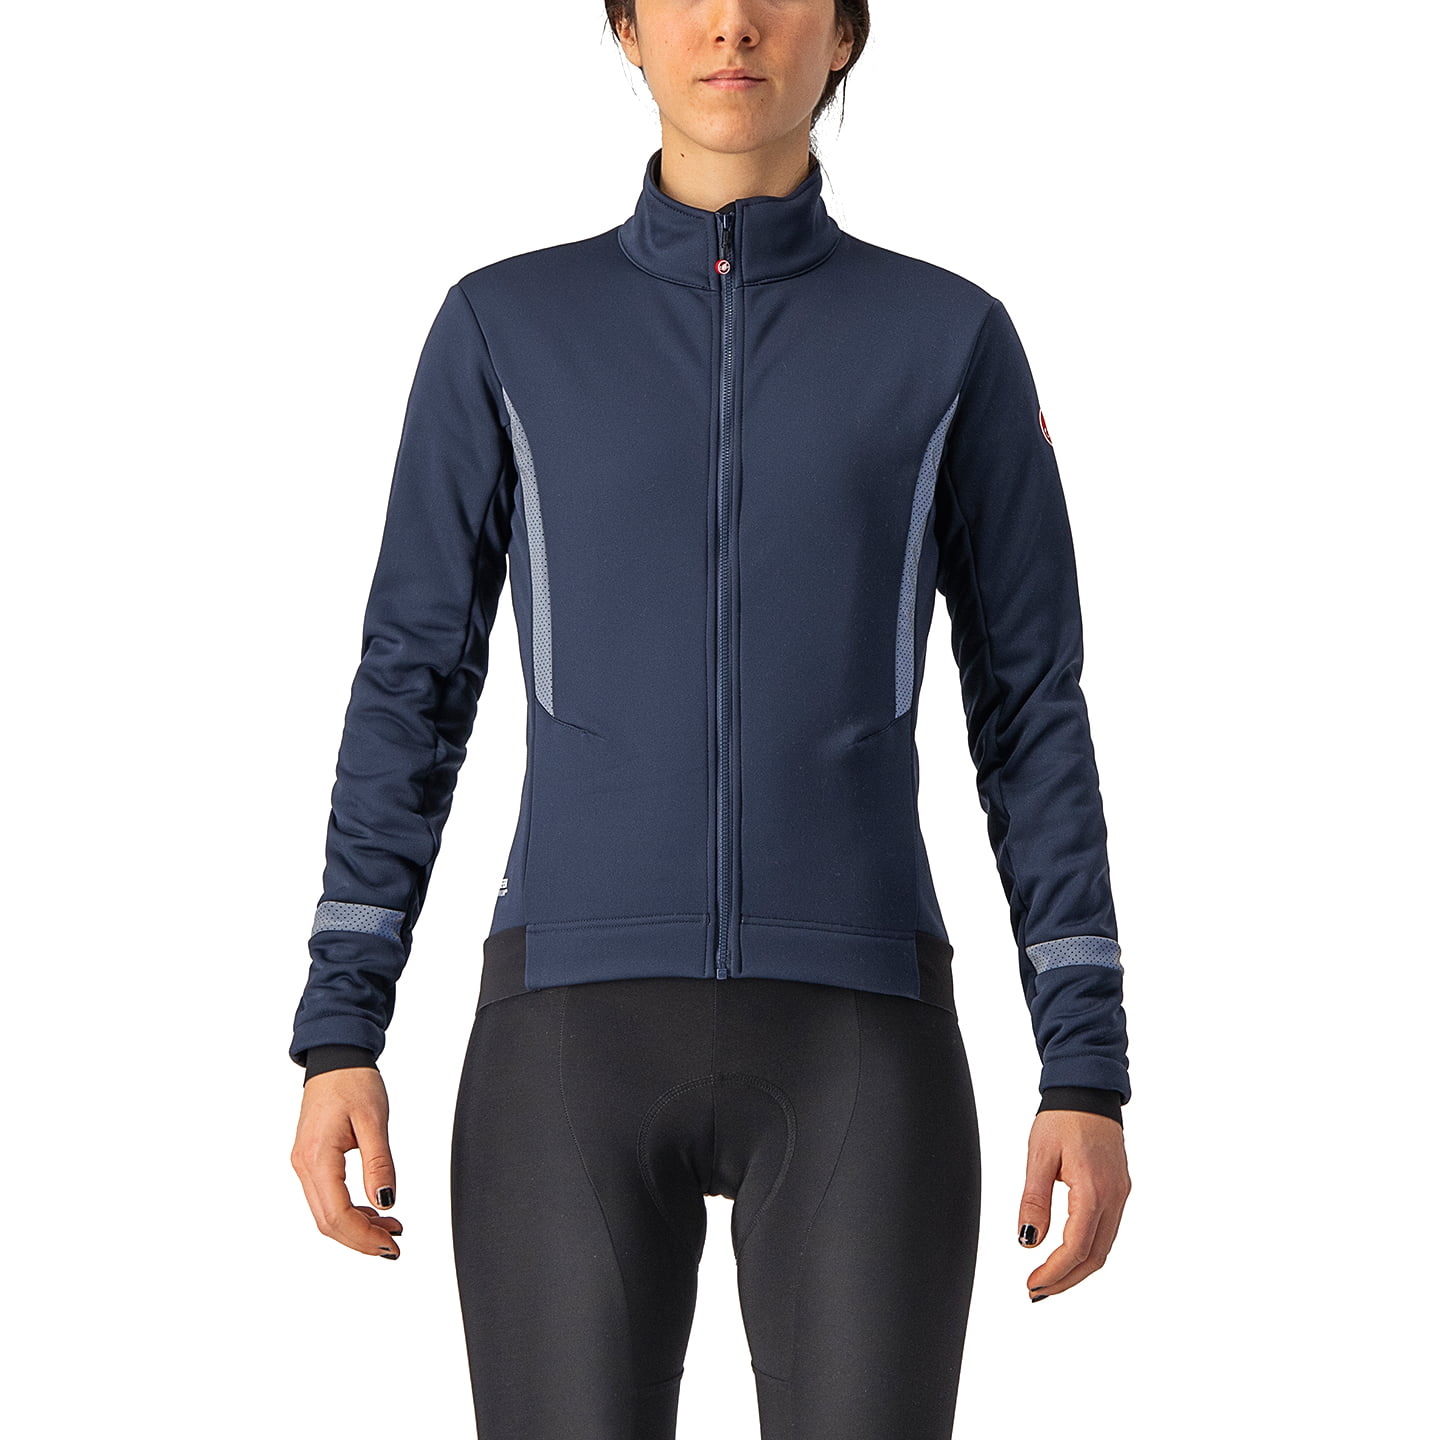 CASTELLI Dinamica 2 Women’s Winter Jacket Women’s Thermal Jacket, size M, Cycle jacket, Cycling clothing